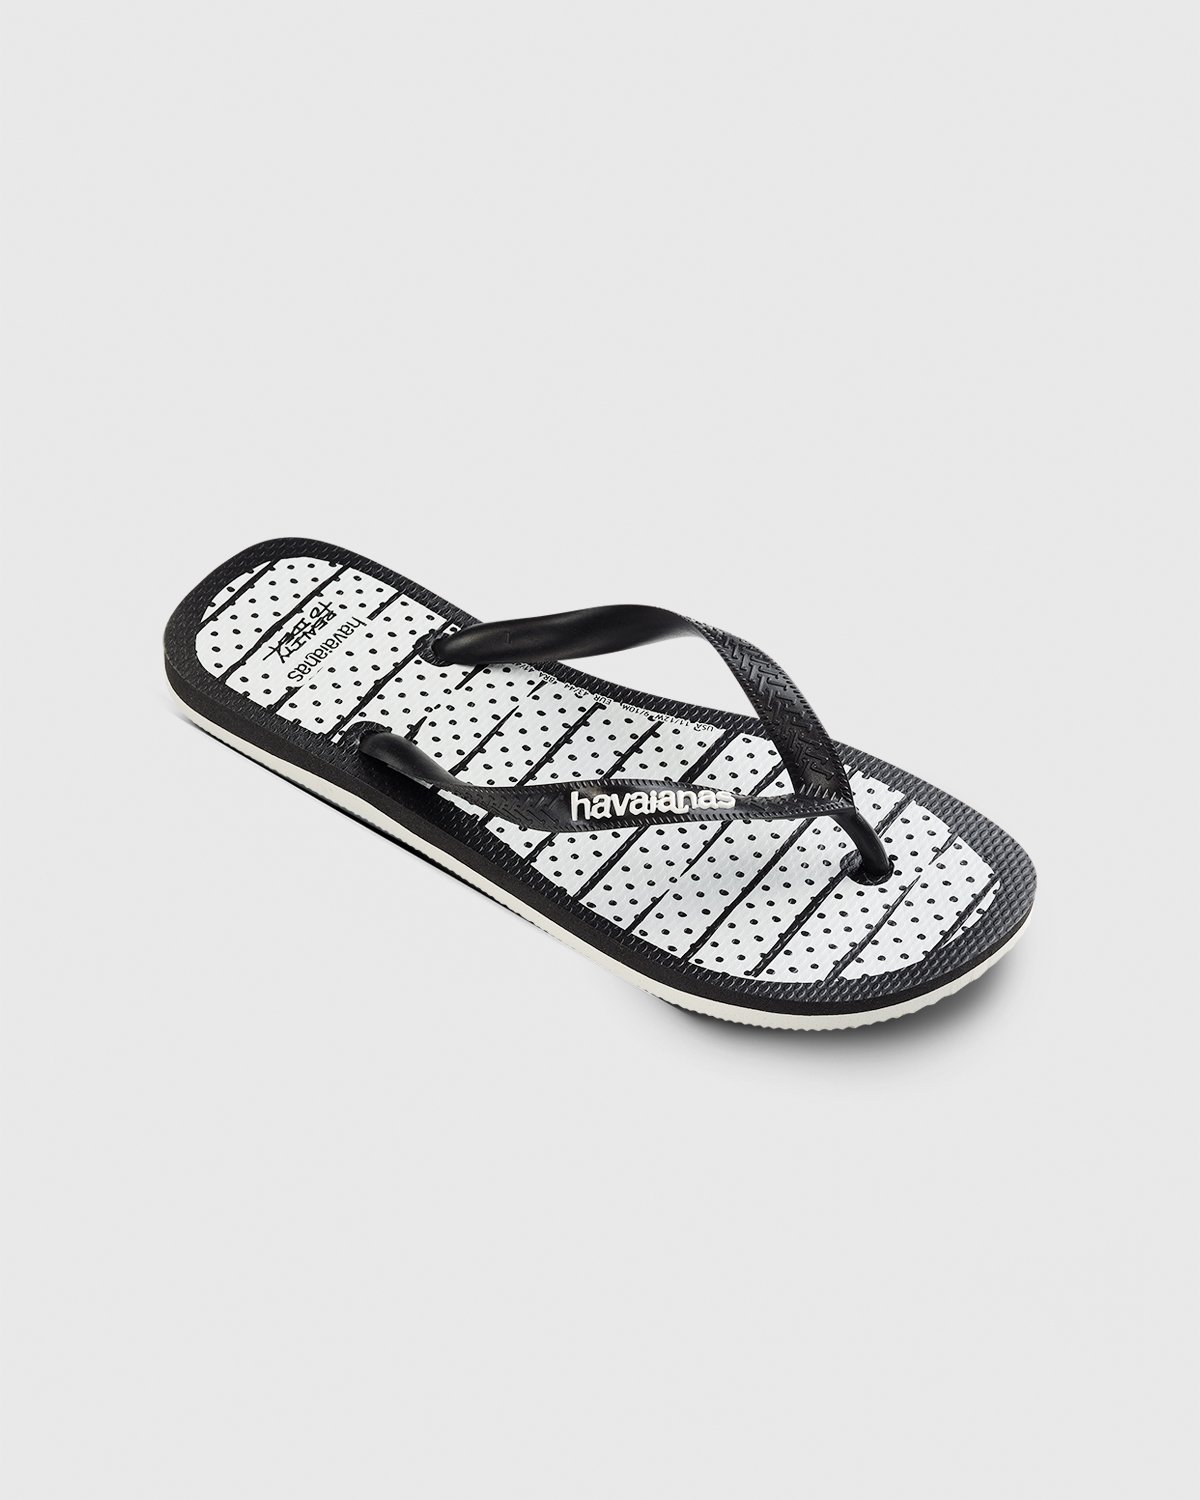 havaianas - Reality to Idea by Joshuas Vides Top White - Footwear - White - Image 2